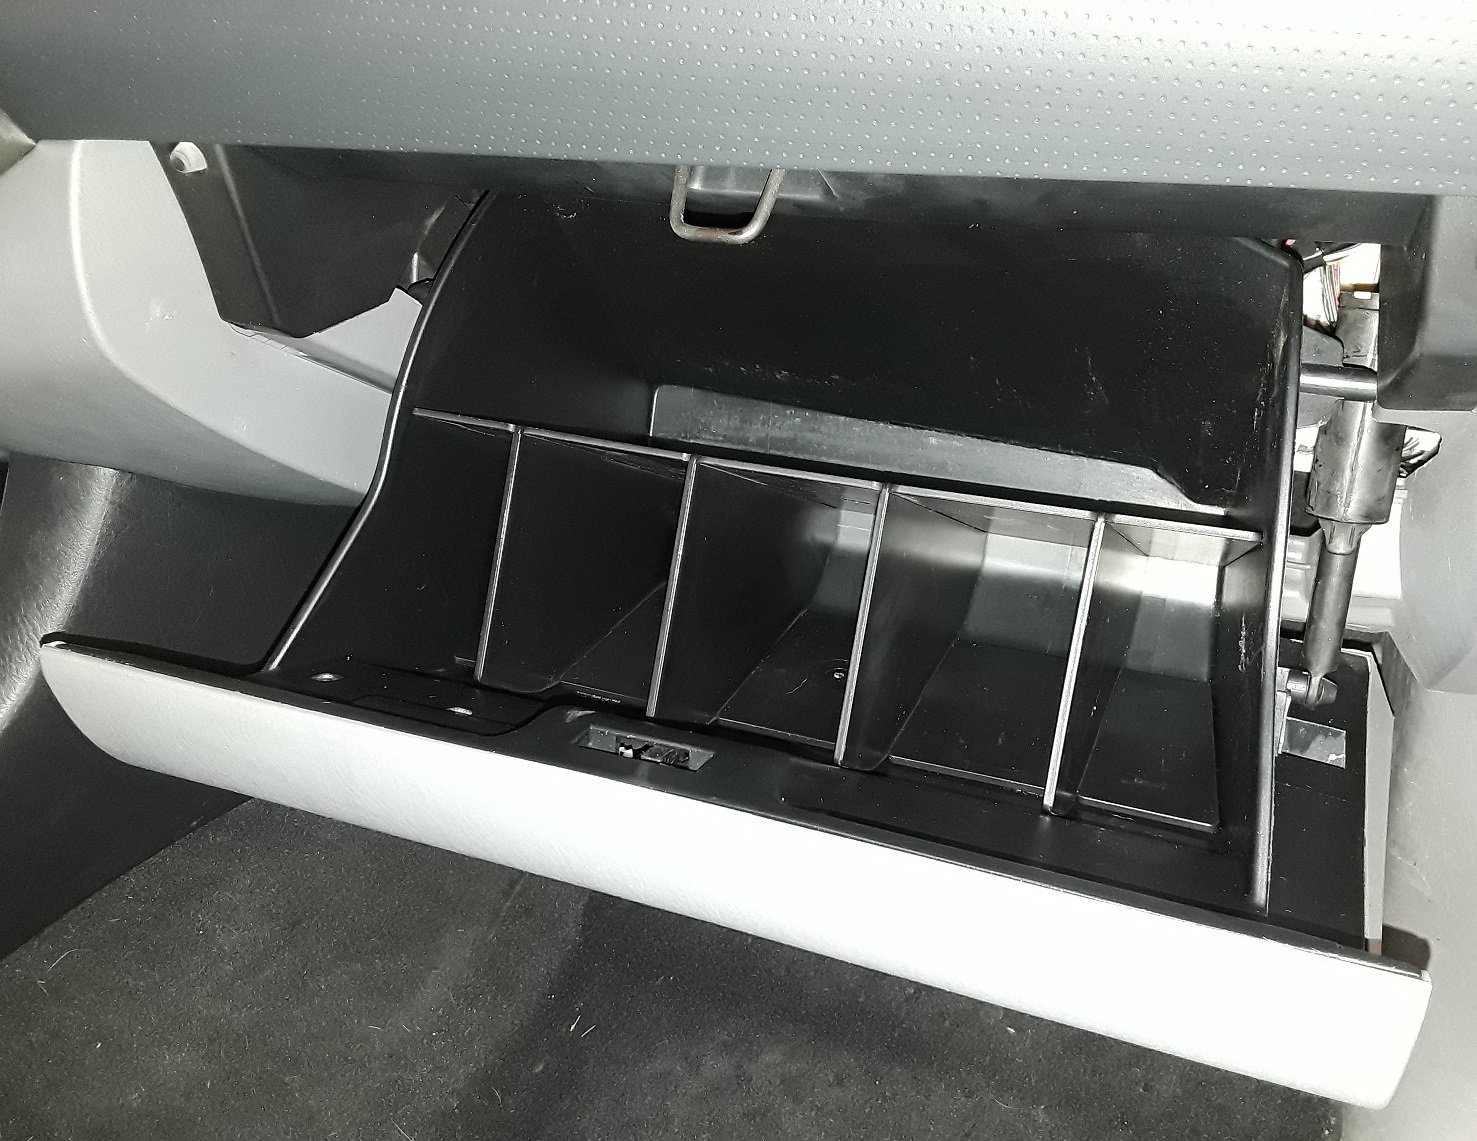 Vehicle OCD - Center Console Divider, Tray, and Glove Box Organizer for Toyota Tacoma (2005-2015) - Made in USA